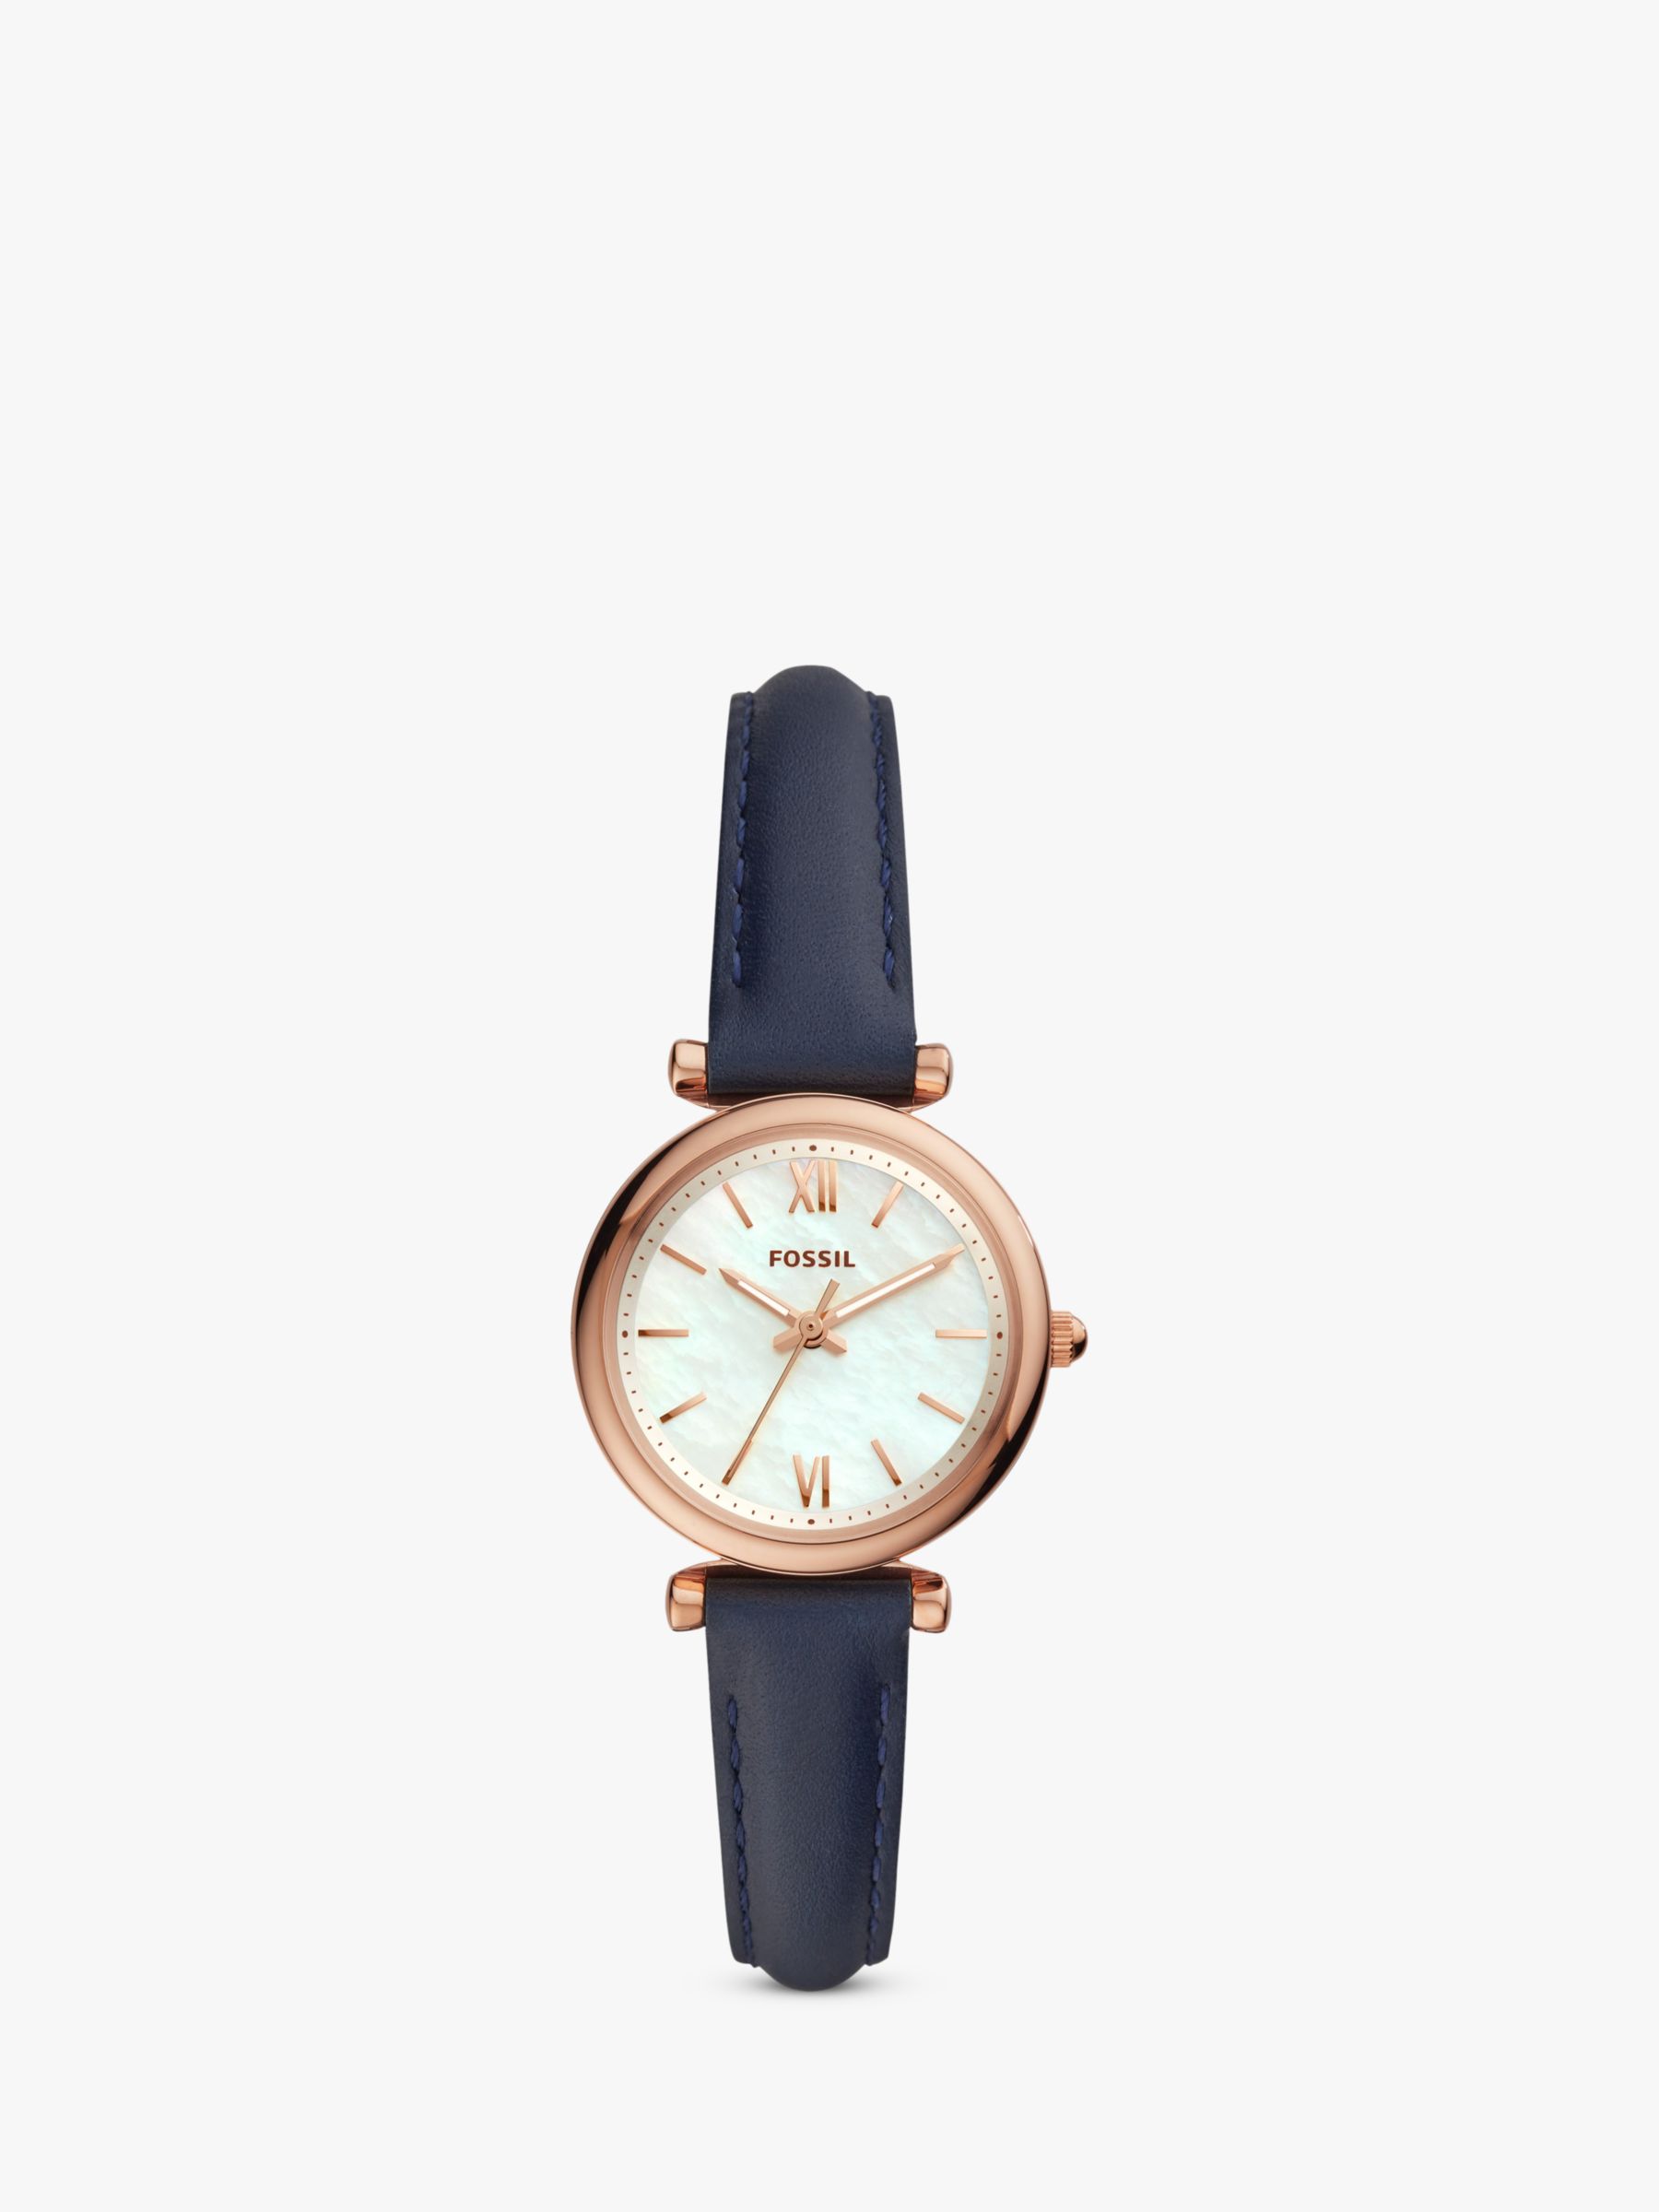 Fossil Women's Carlie Leather Strap Watch, Navy/White ES4502 at John Lewis  & Partners